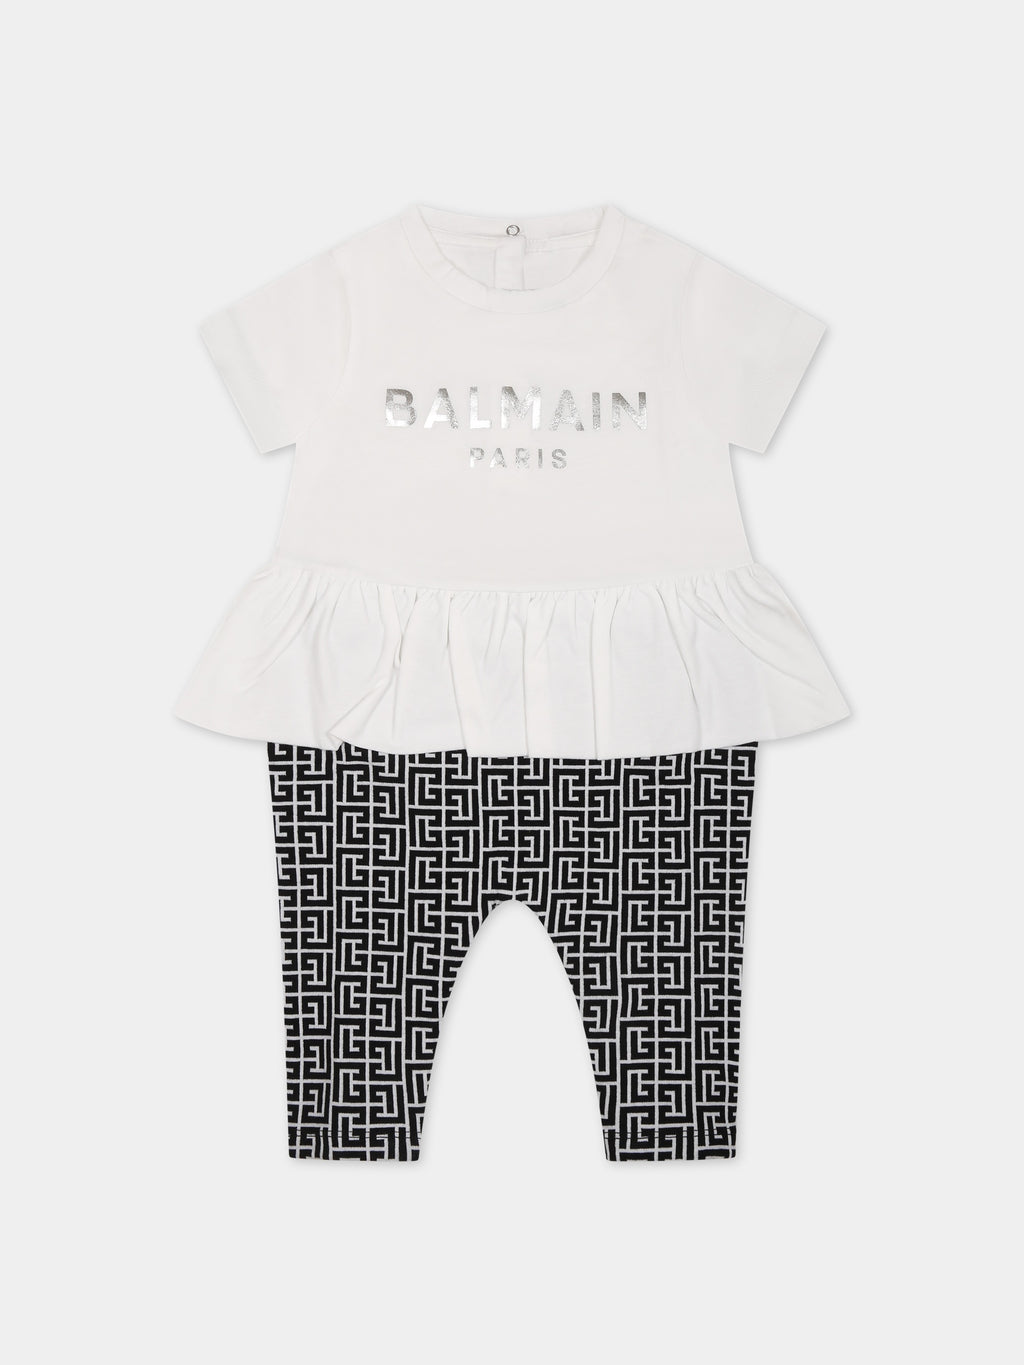 White babygrow for baby girl with logo